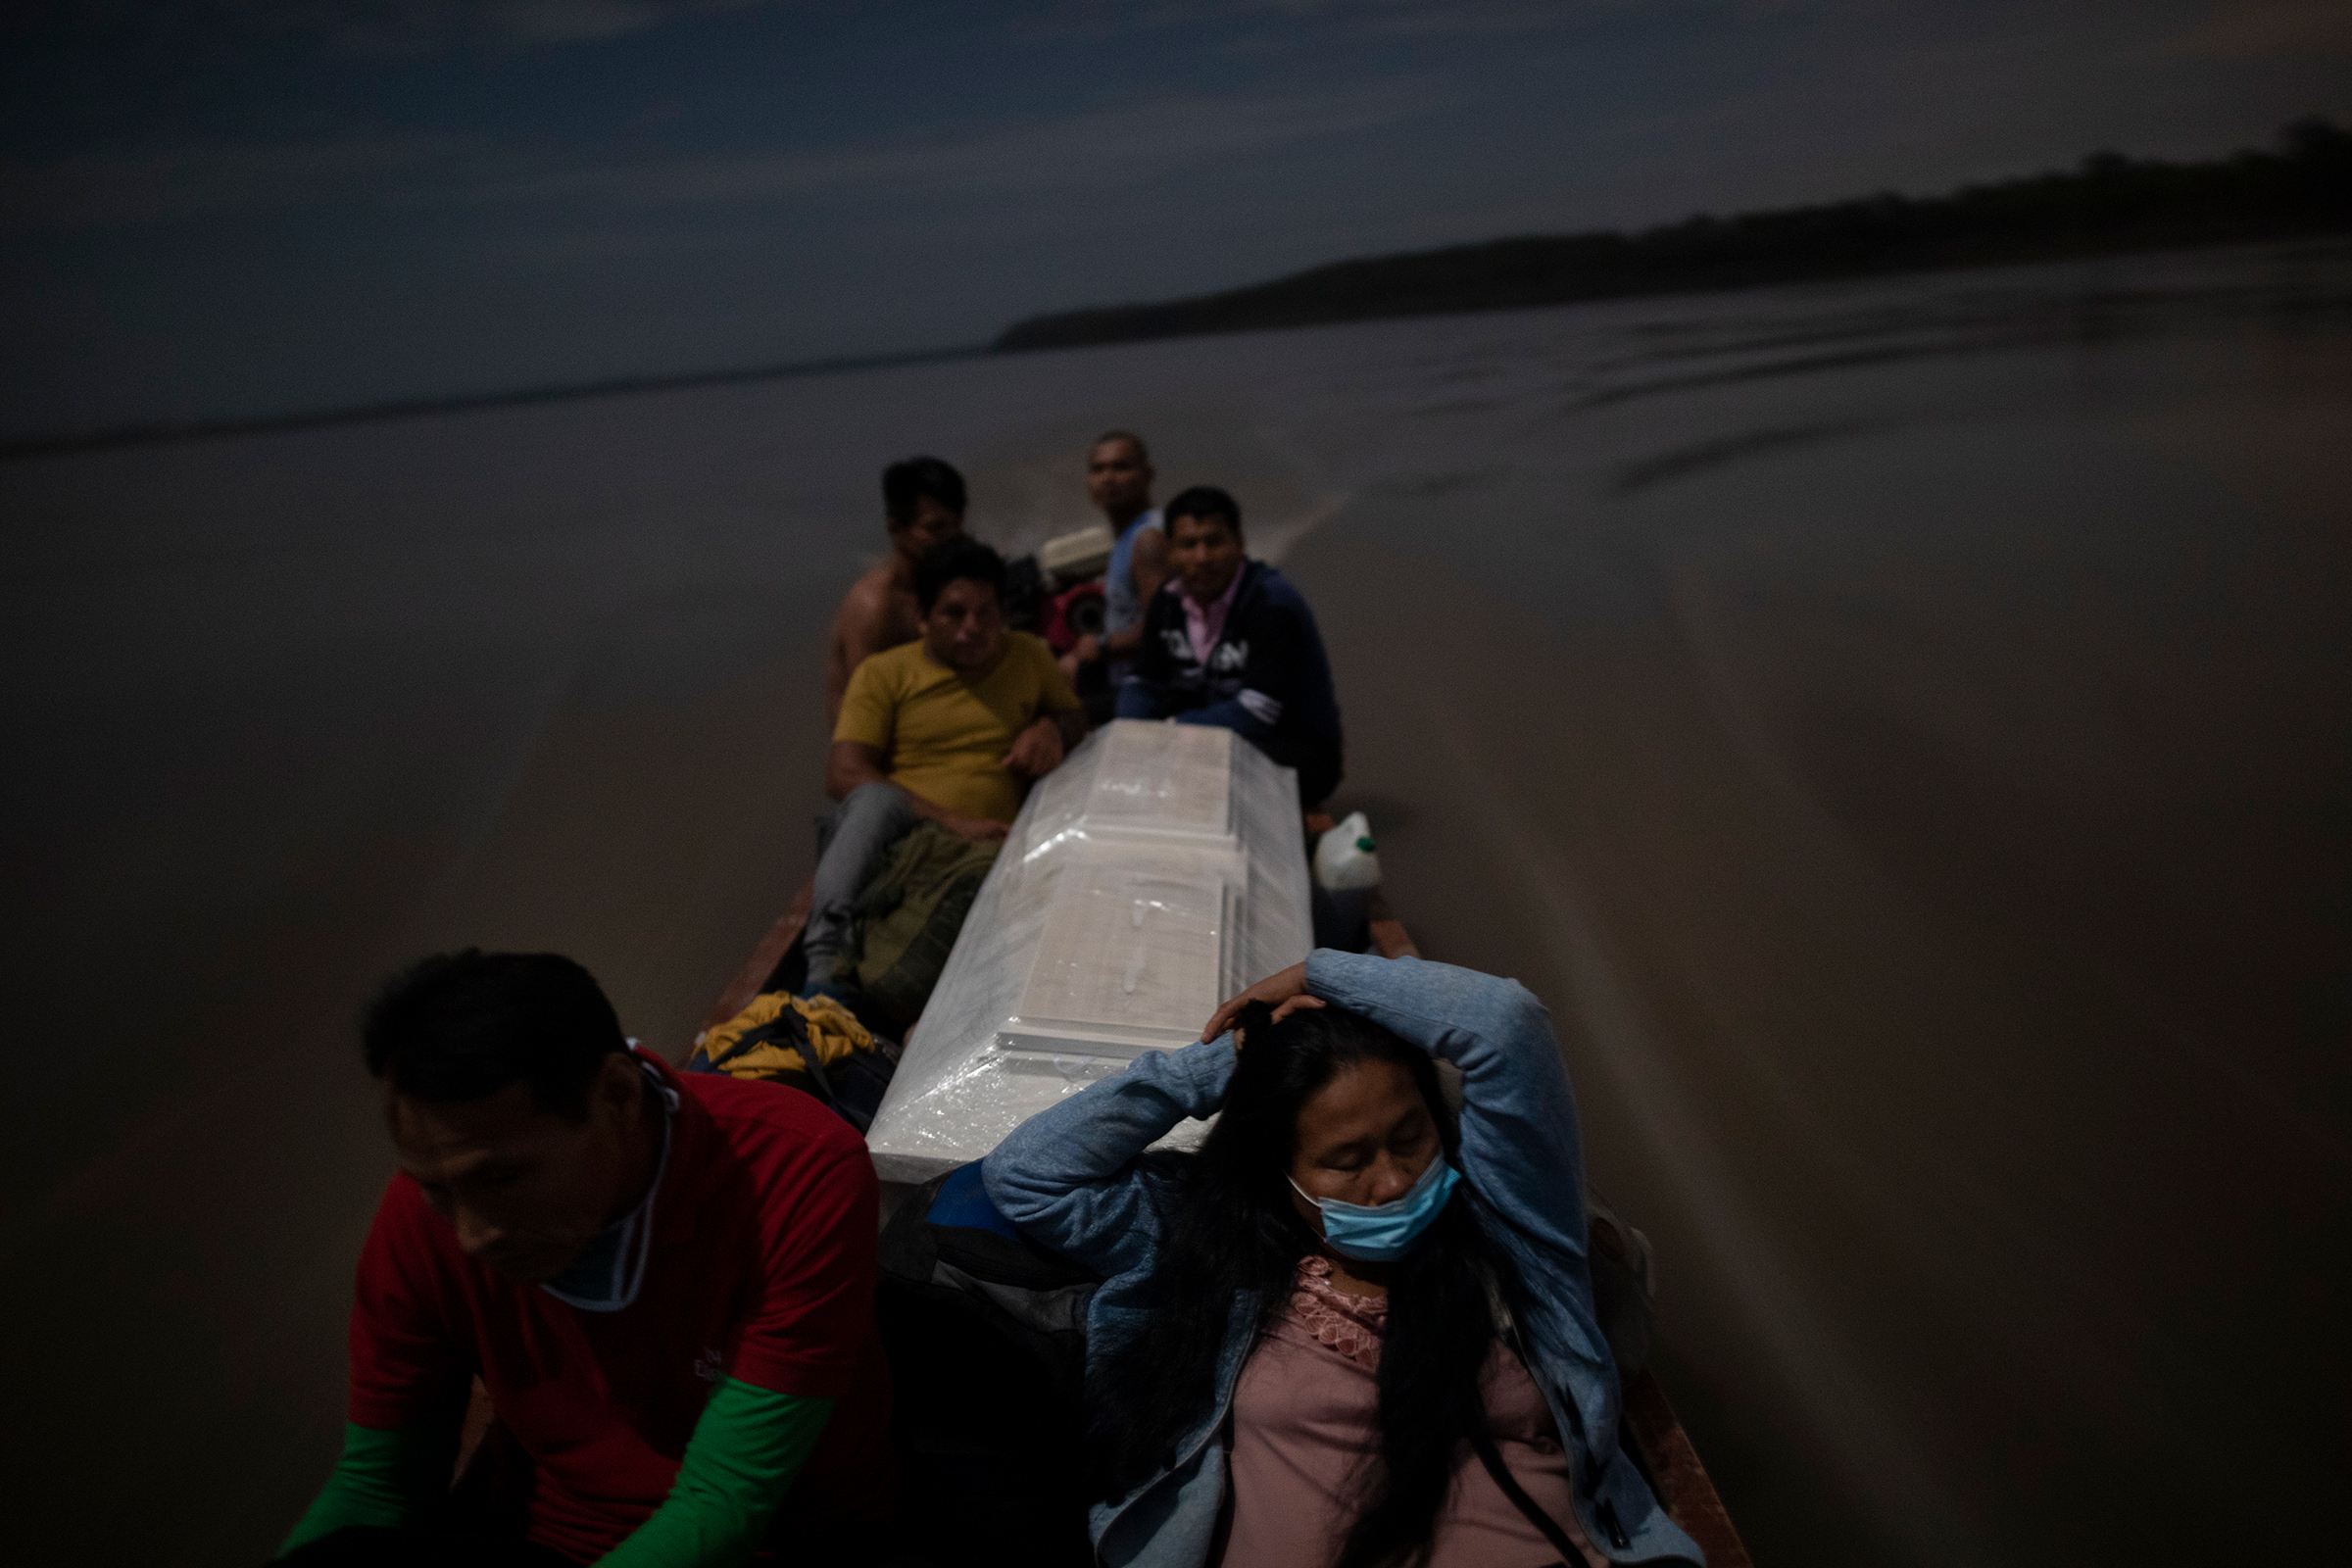 Relatives accompany the coffin of Jose Barbaran, who was believed to have died from coronavirus complications, as they travel by boat on Peru's Ucayali River on Sept. 29, 2020. Despite the risk, family members decided to travel by night to Barbaran's hometown of Palestina, a four-hour journey.